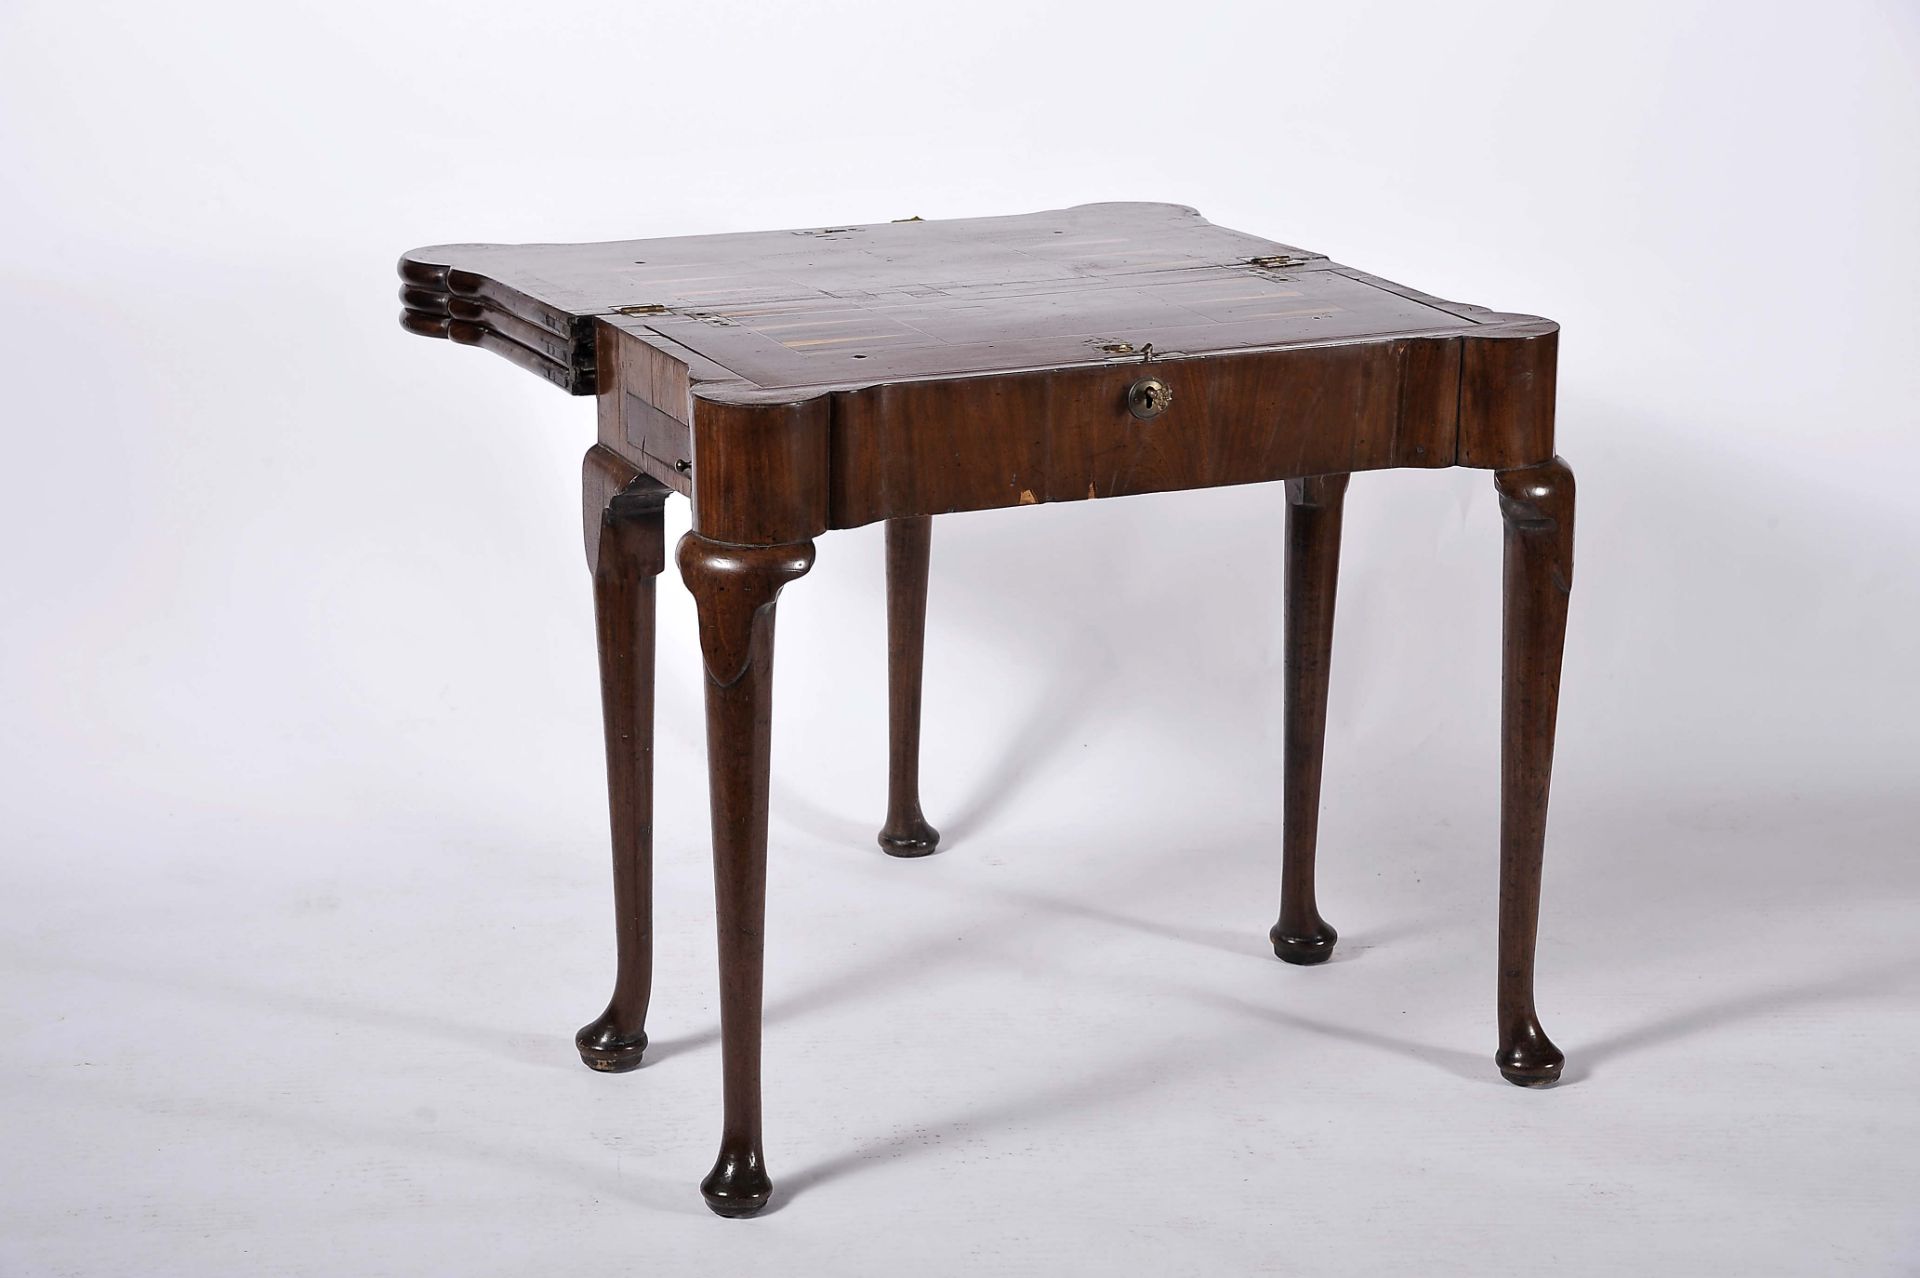 A five-legged game and tea table with different tops - tea, cards, chess and backgammon - Image 6 of 12